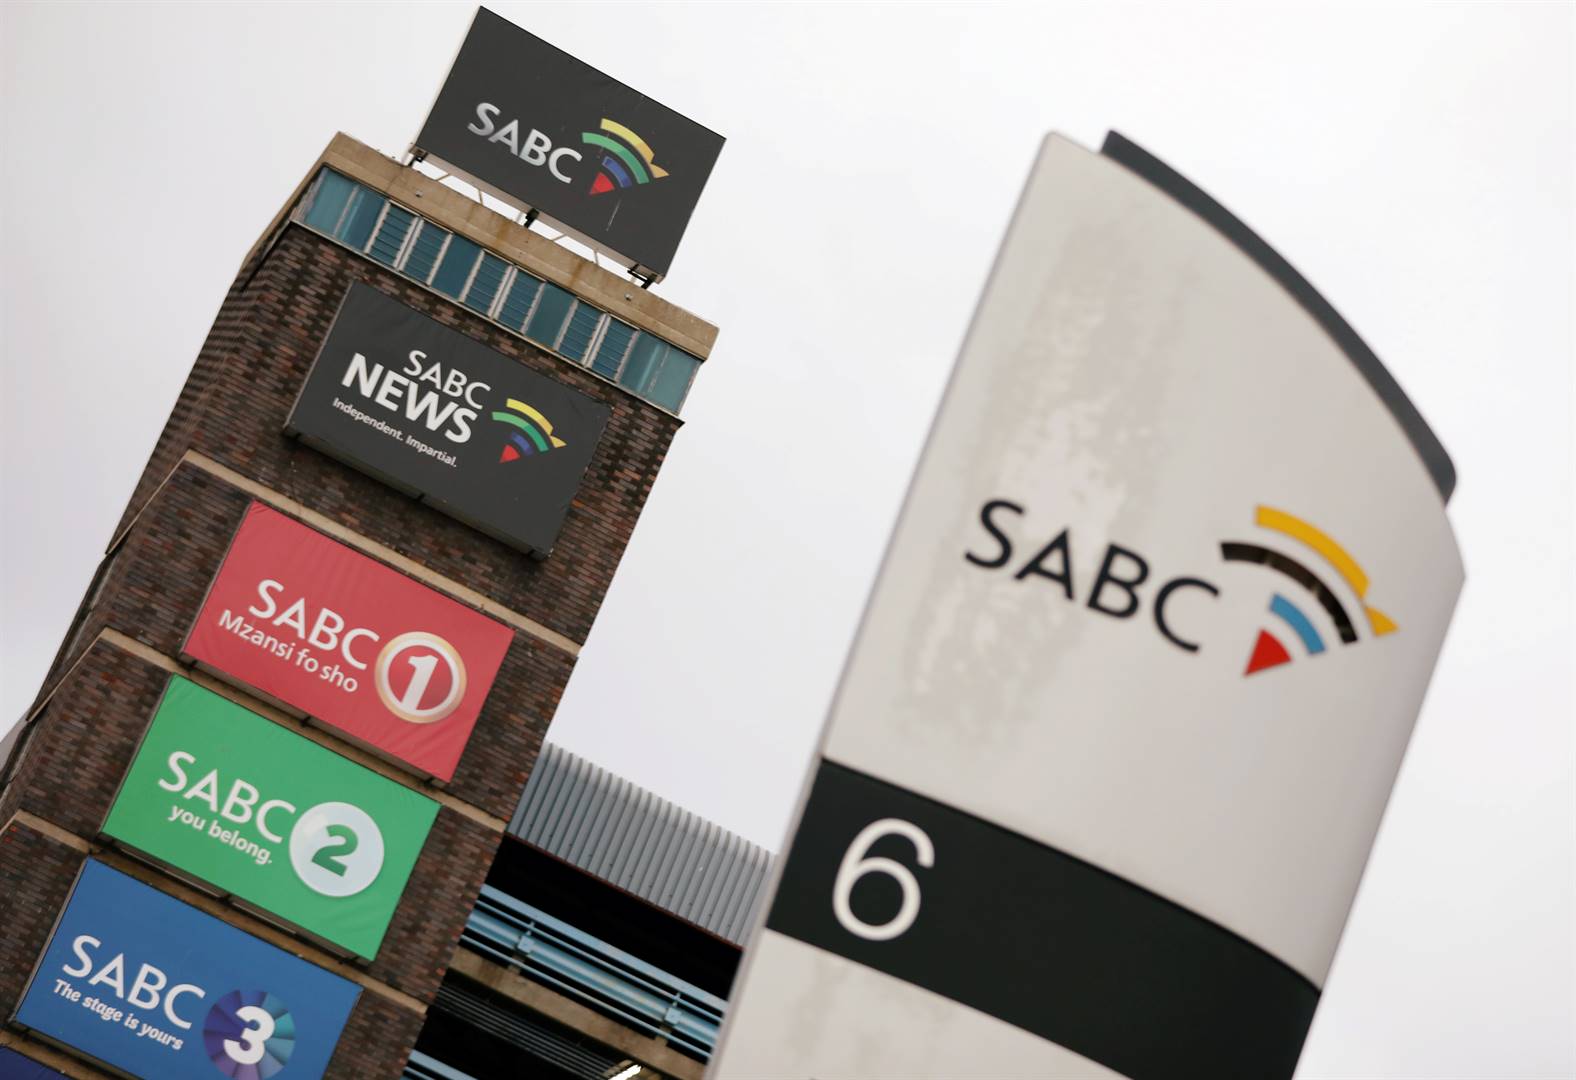 Former SABC employee, Lethabo Maunatlala resigned 17 years ago after being harasses by former boss. 